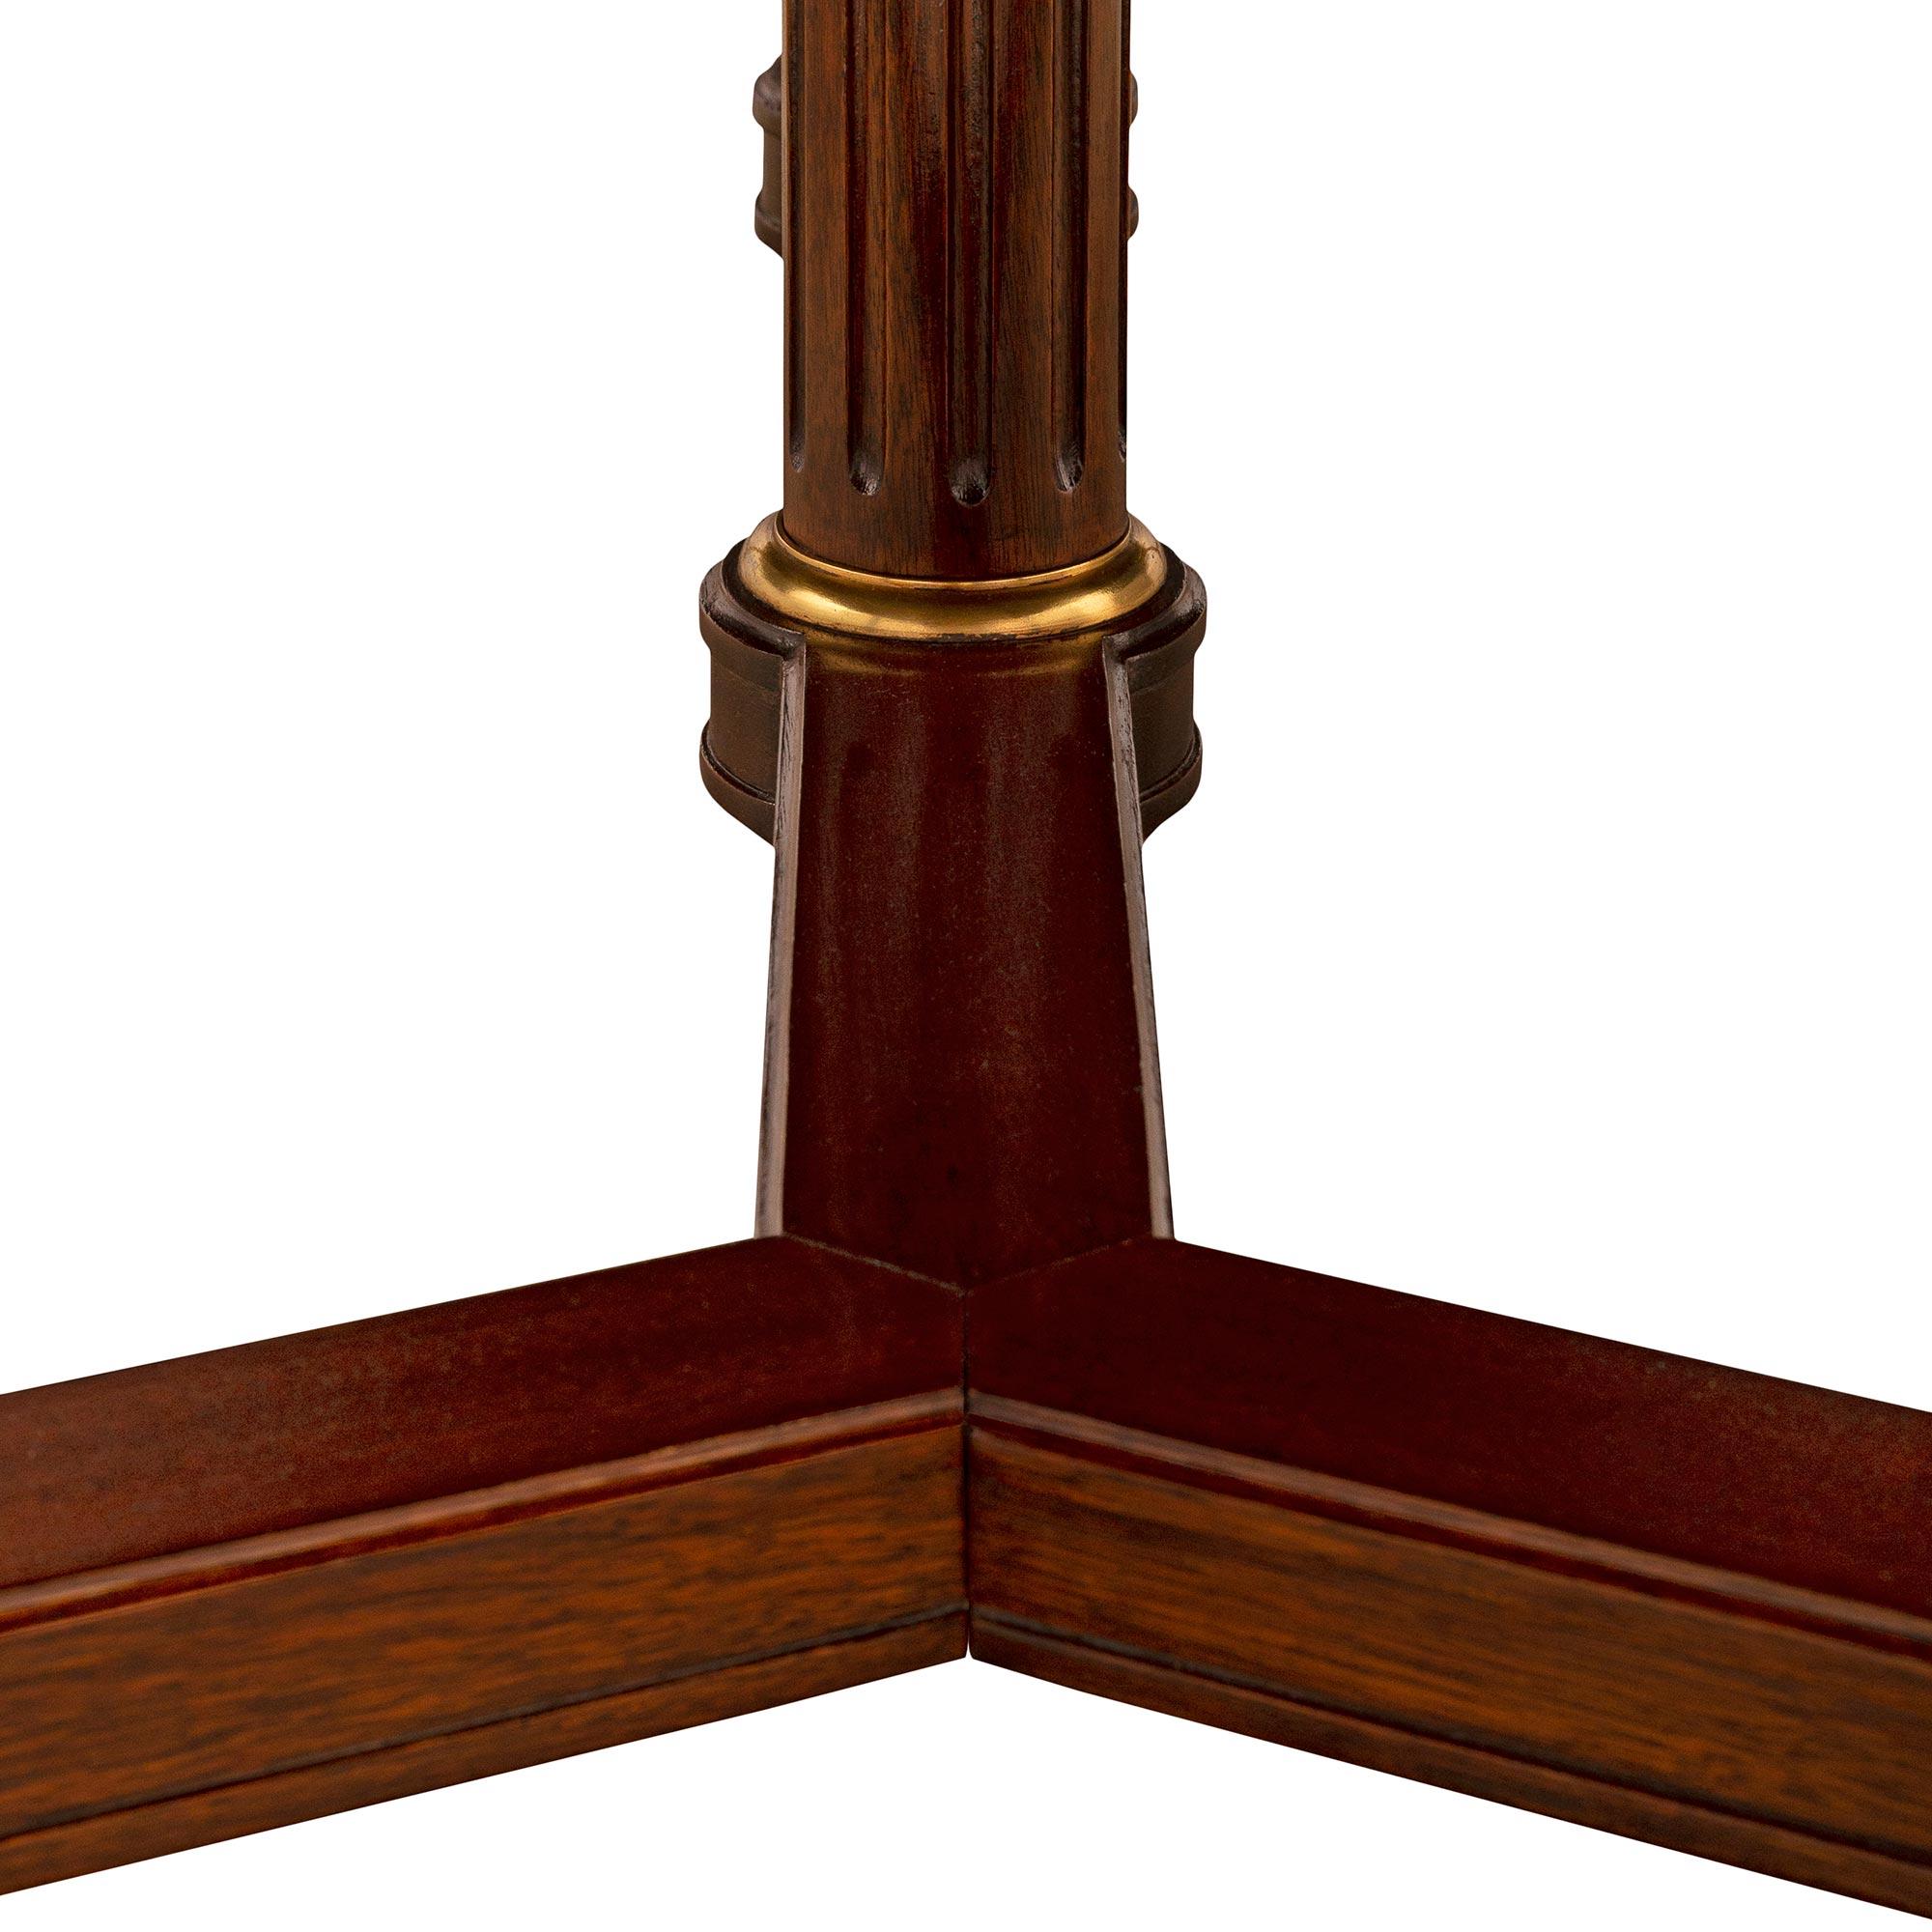 French Turn of the Century Empire St. Flamed Mahogany and Ormolu Dining Table For Sale 8